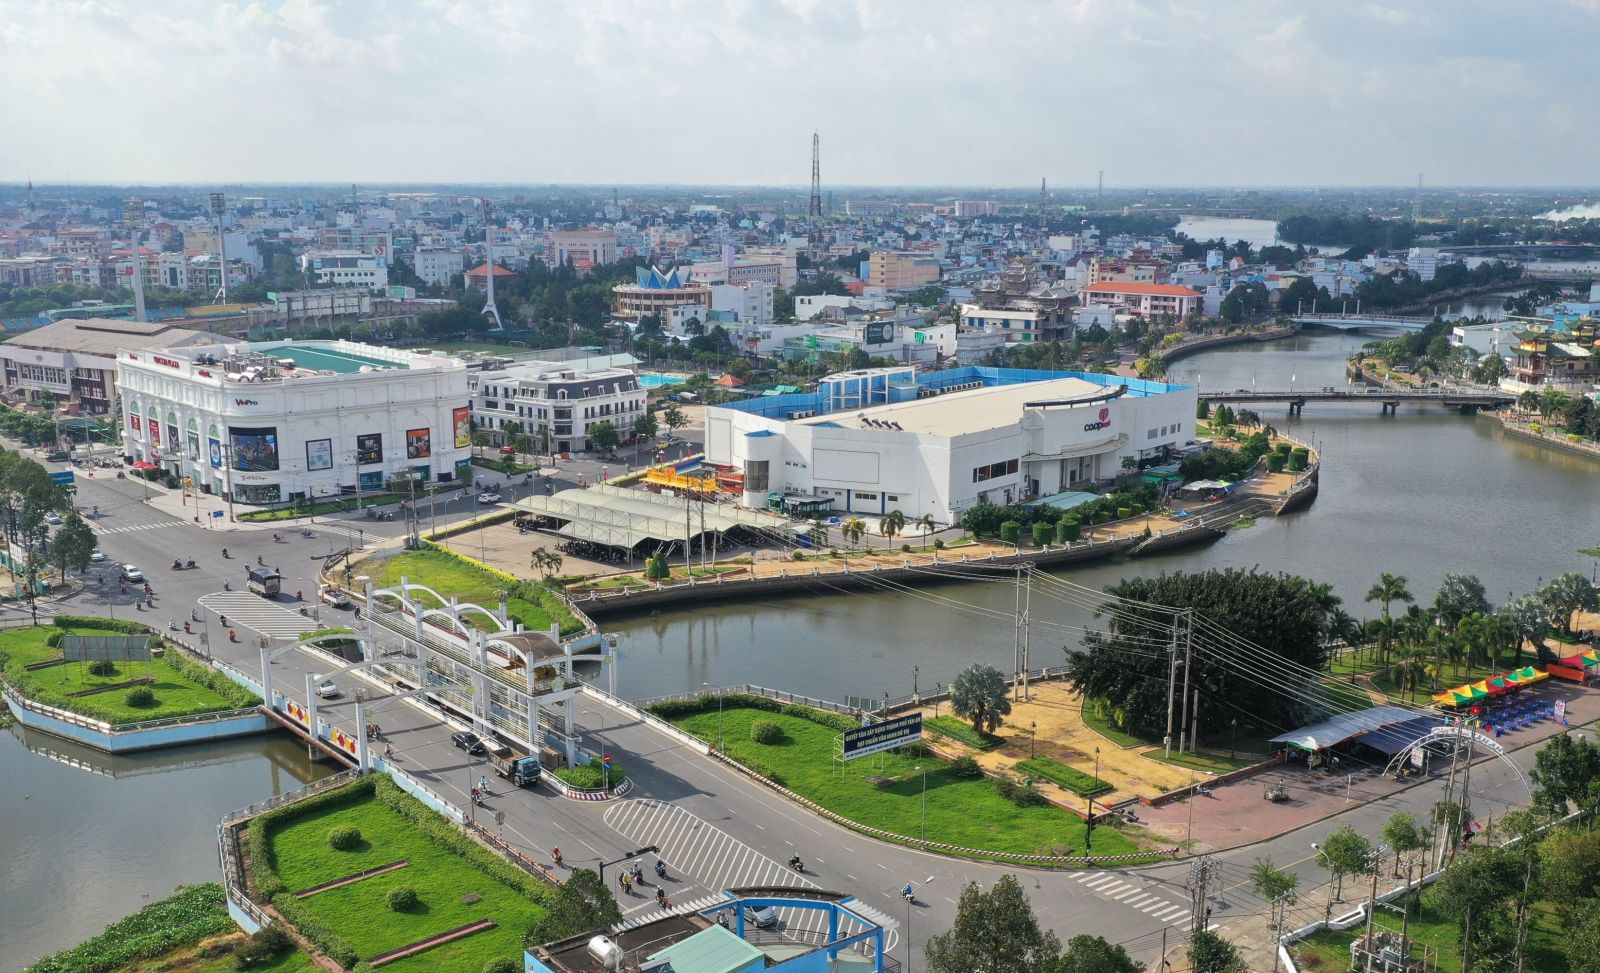 Kien Tuong urban has developed strongly, demonstrated its central position in the Dong Thap Muoi region